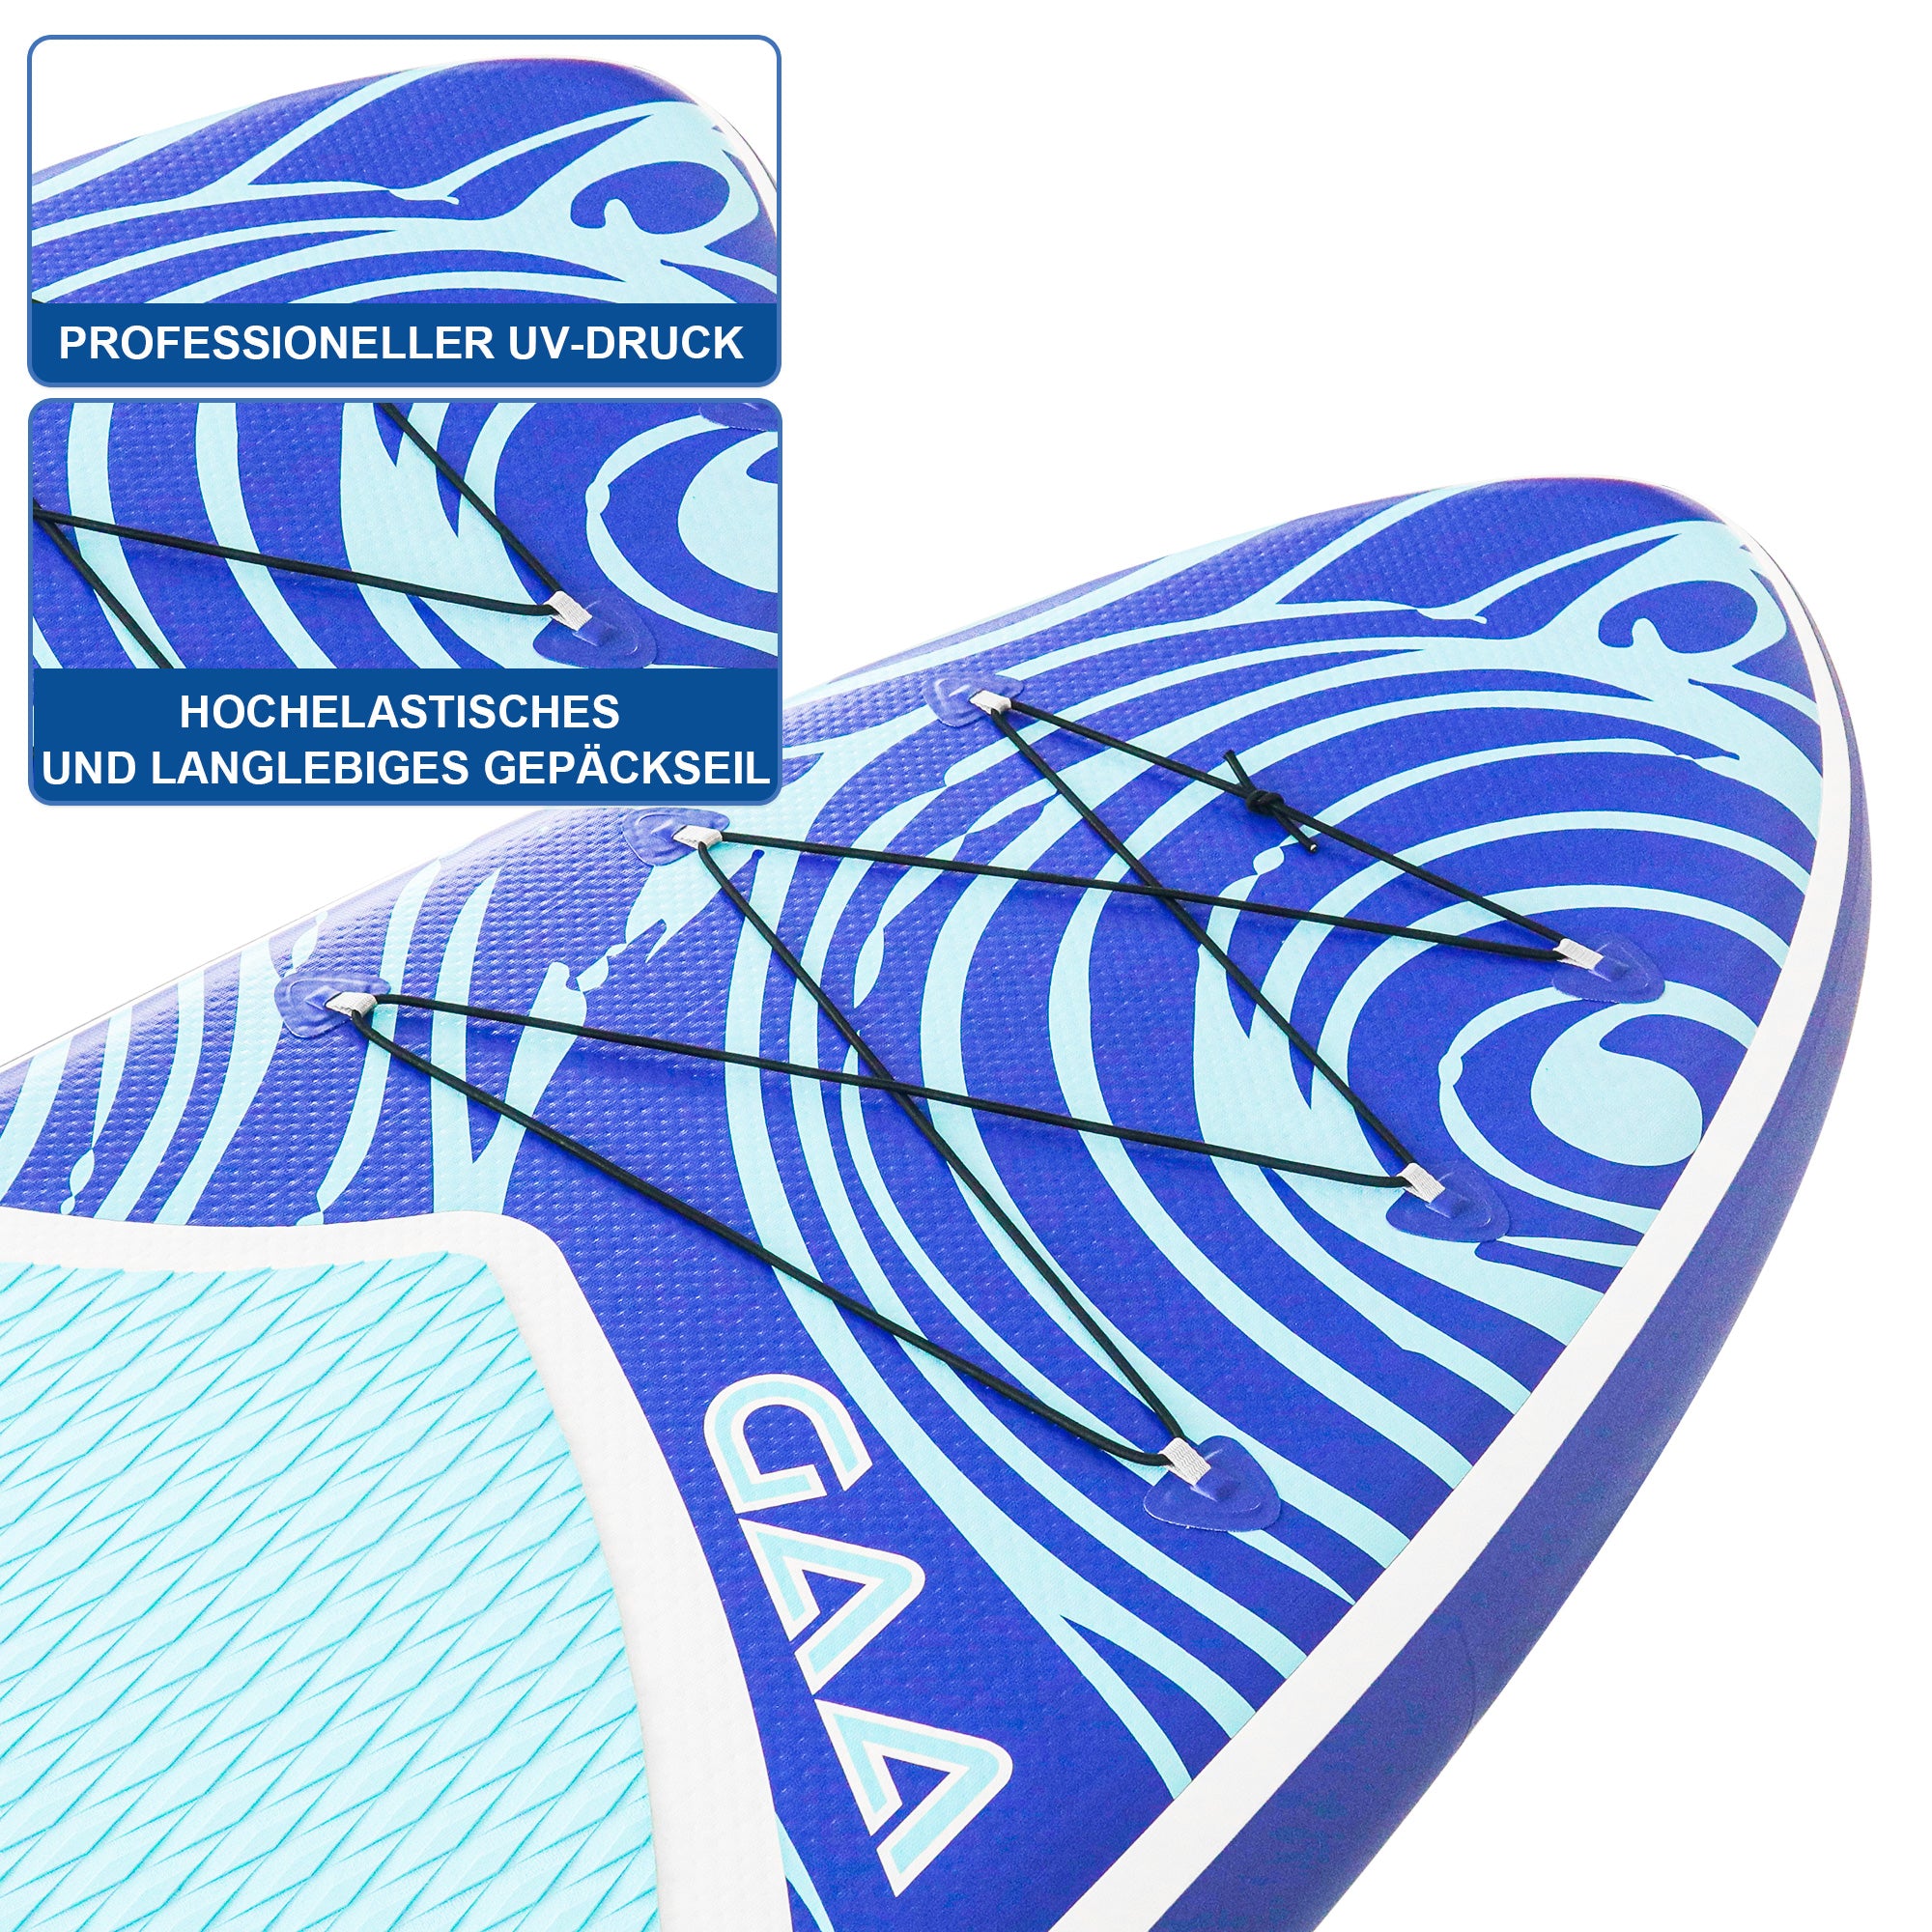 AKD Dolphin 11' Stand Up Paddle Board SUP 335x83x15cm 170kg / 346L (Bleu)